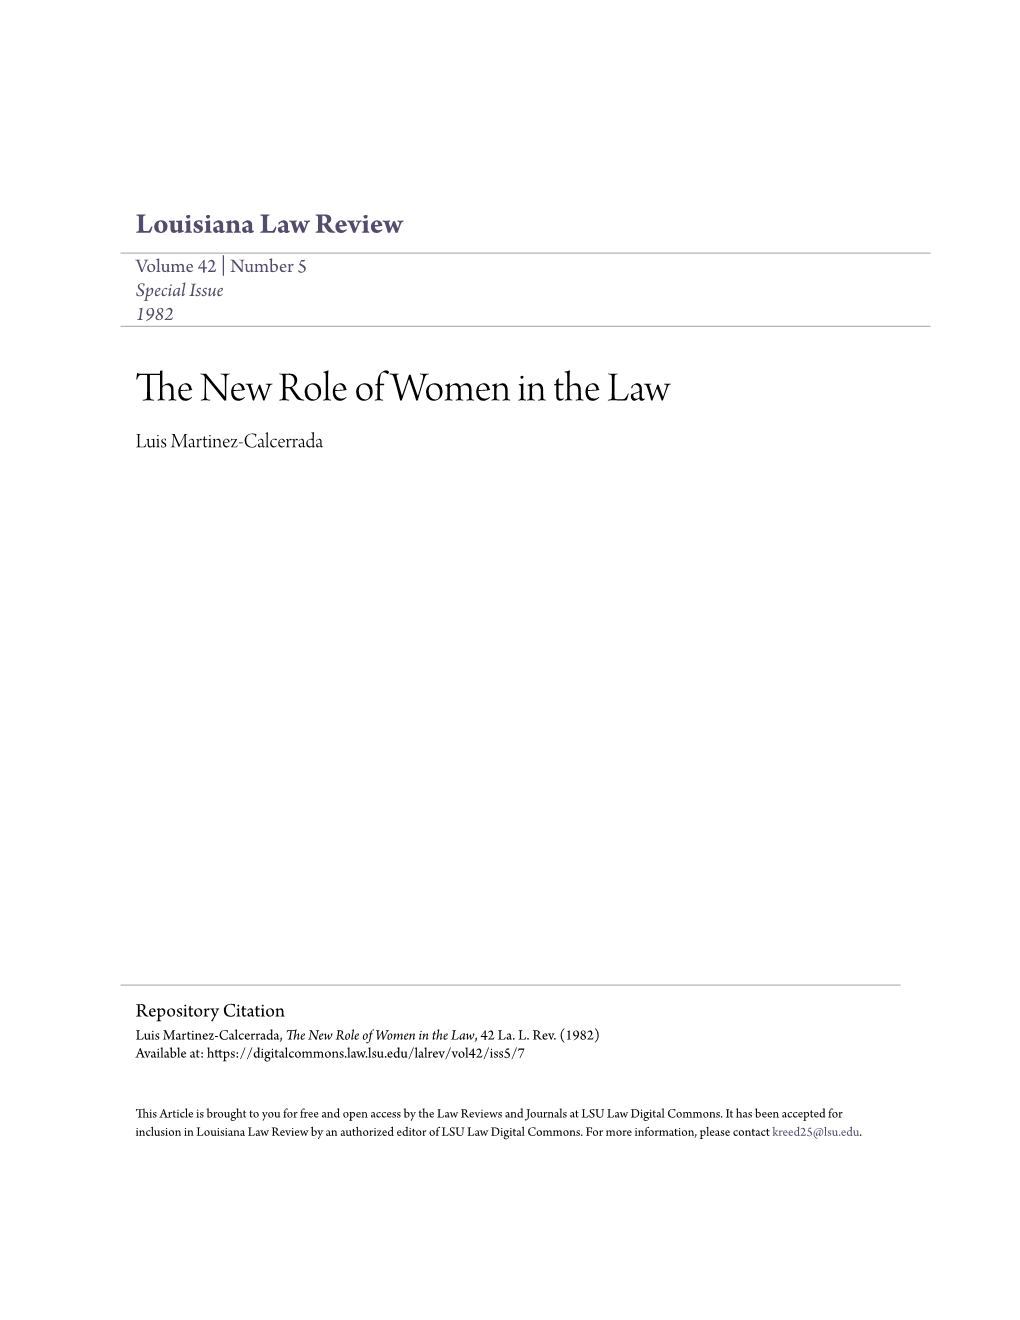 The New Role of Women in the Law, 42 La